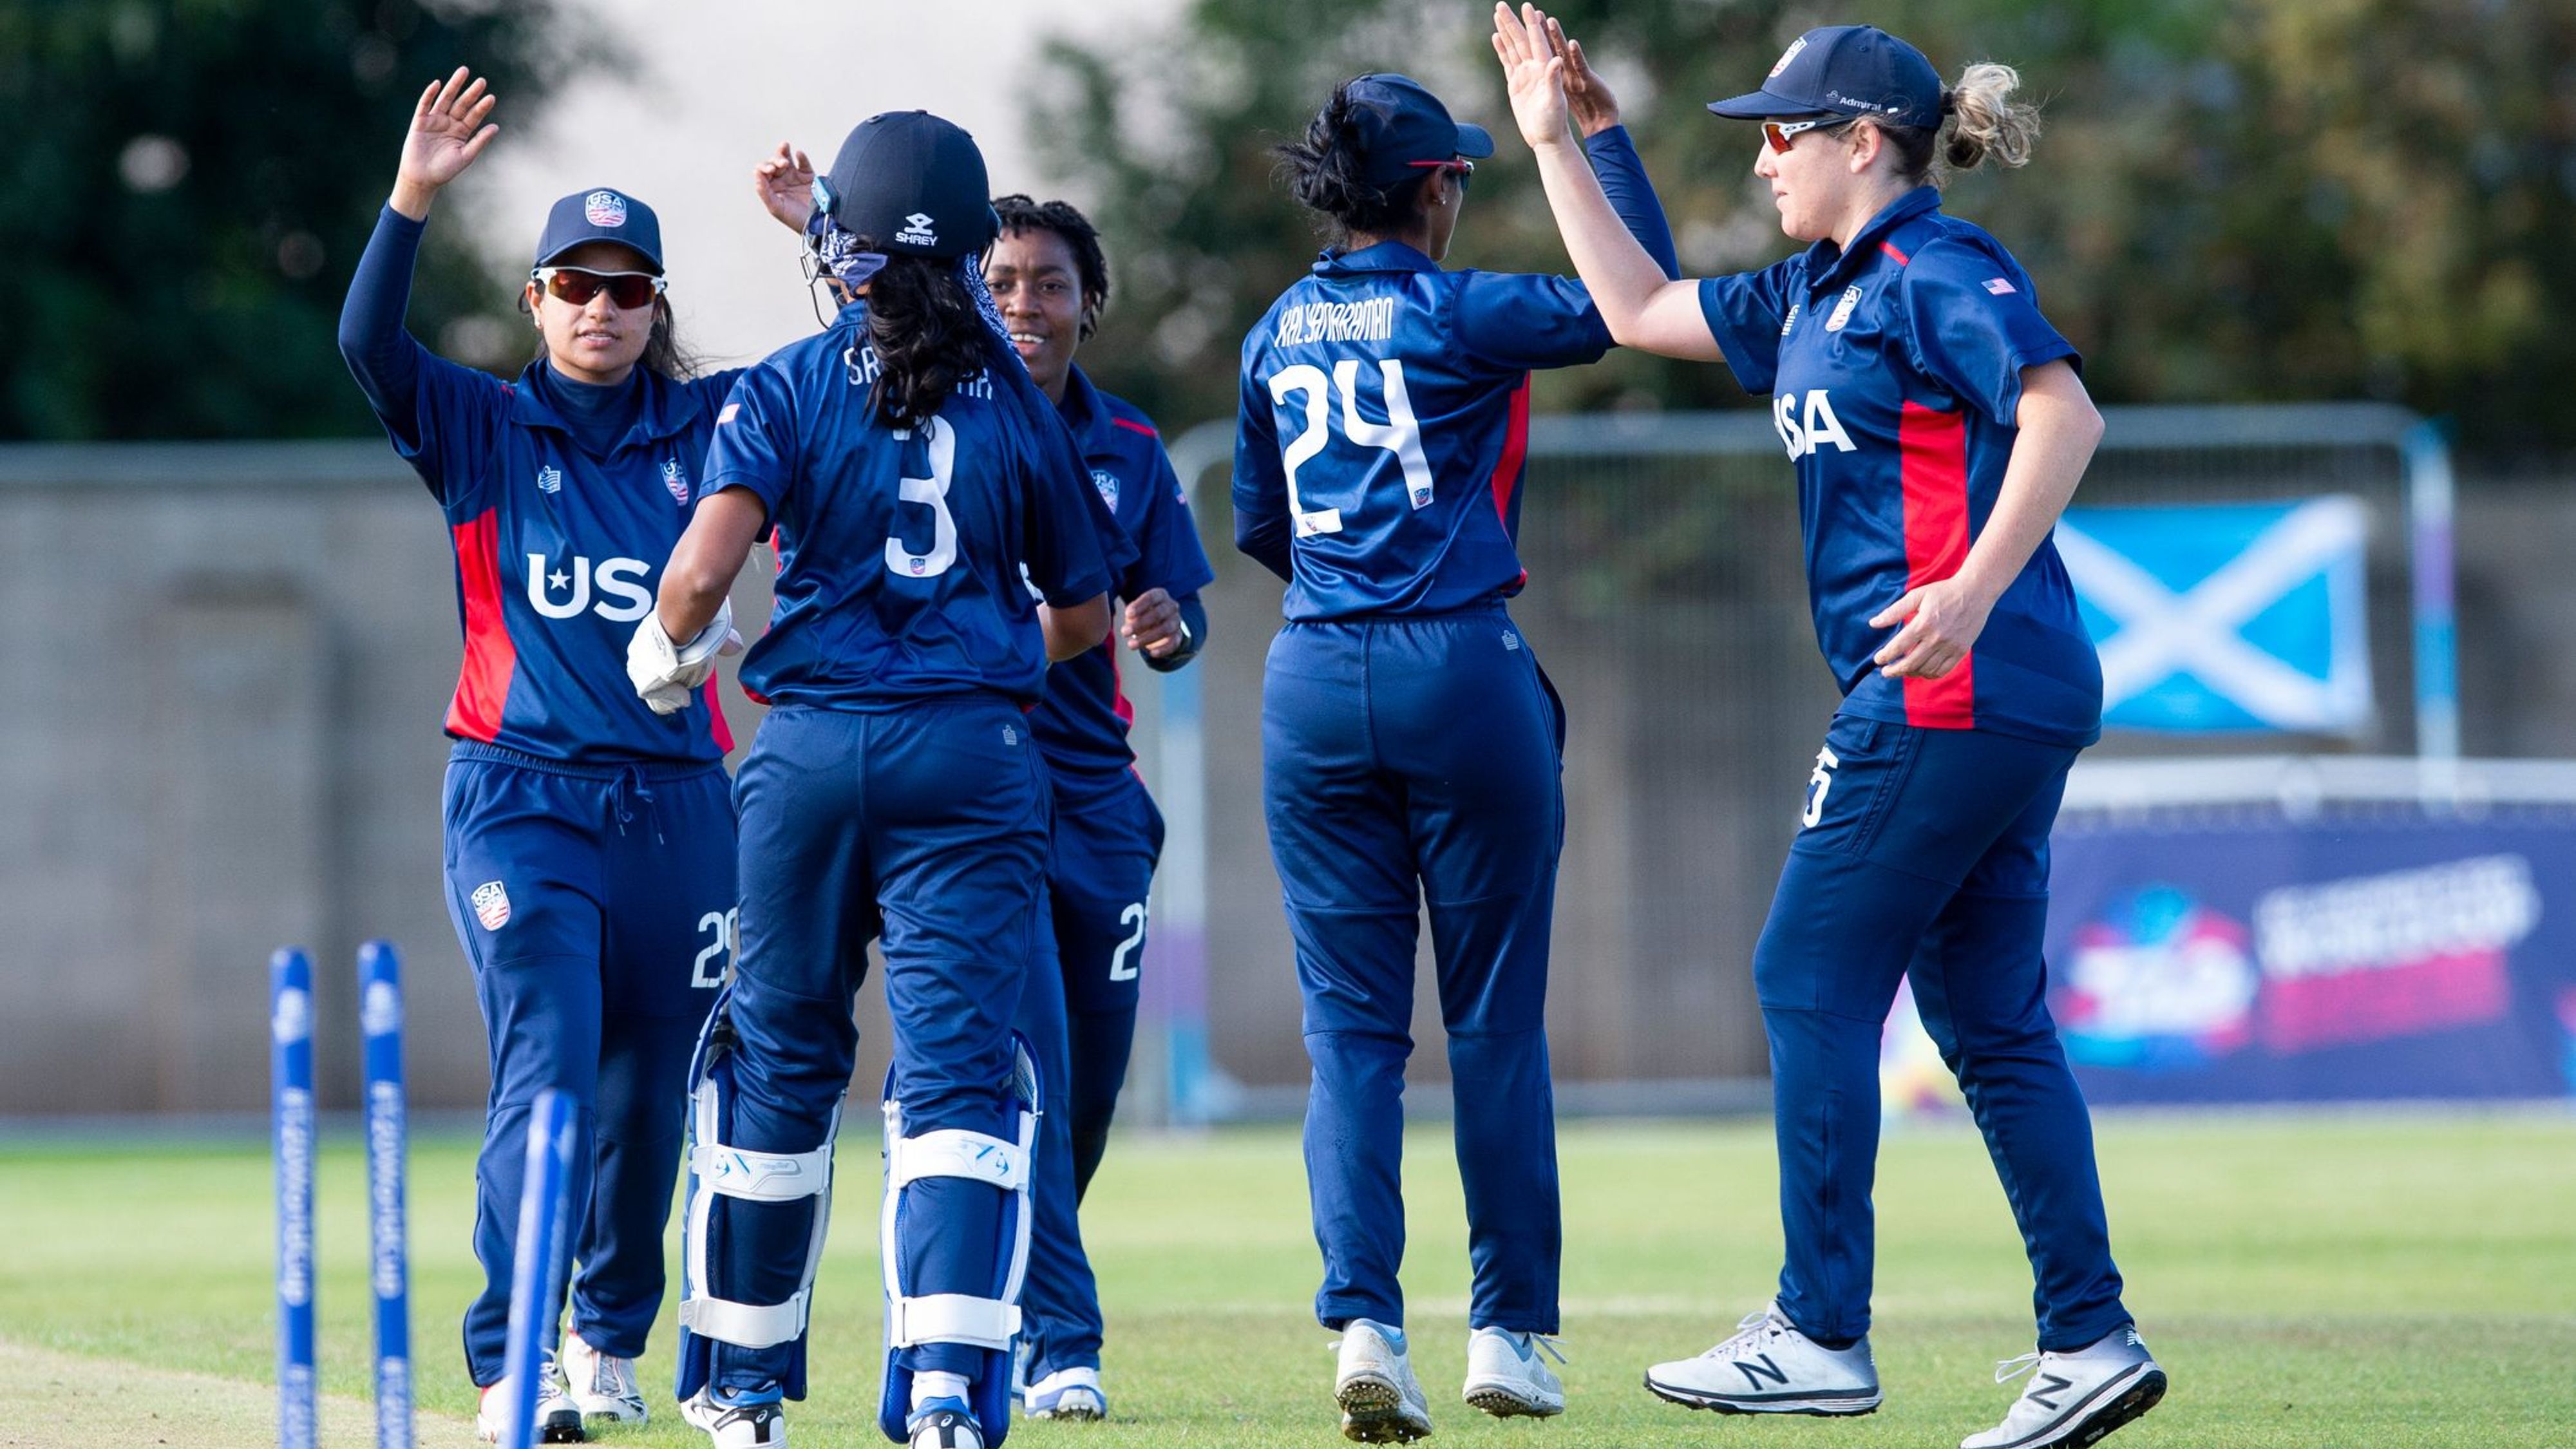 New Pathway for Women & Girl Cricketers